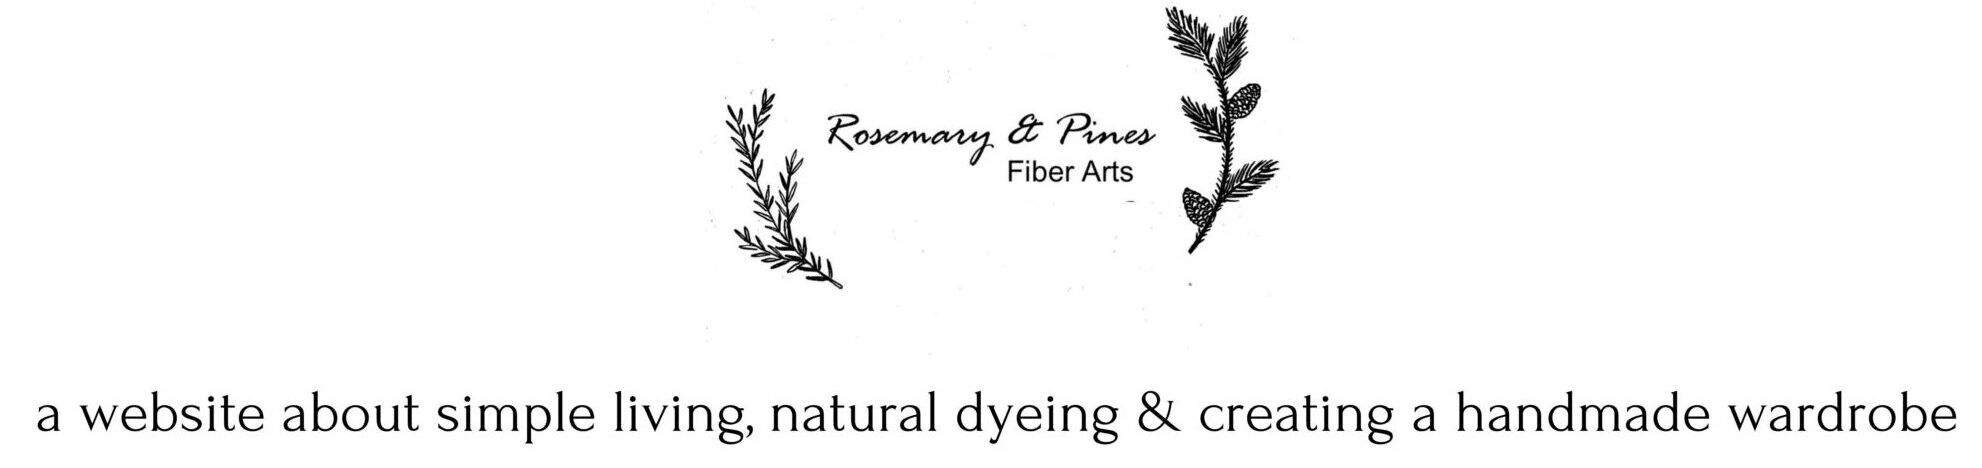 logo of rosemary & pines fiber arts and a text saying: a website about simple living, natural dyeing & creating a handmade wardrobe